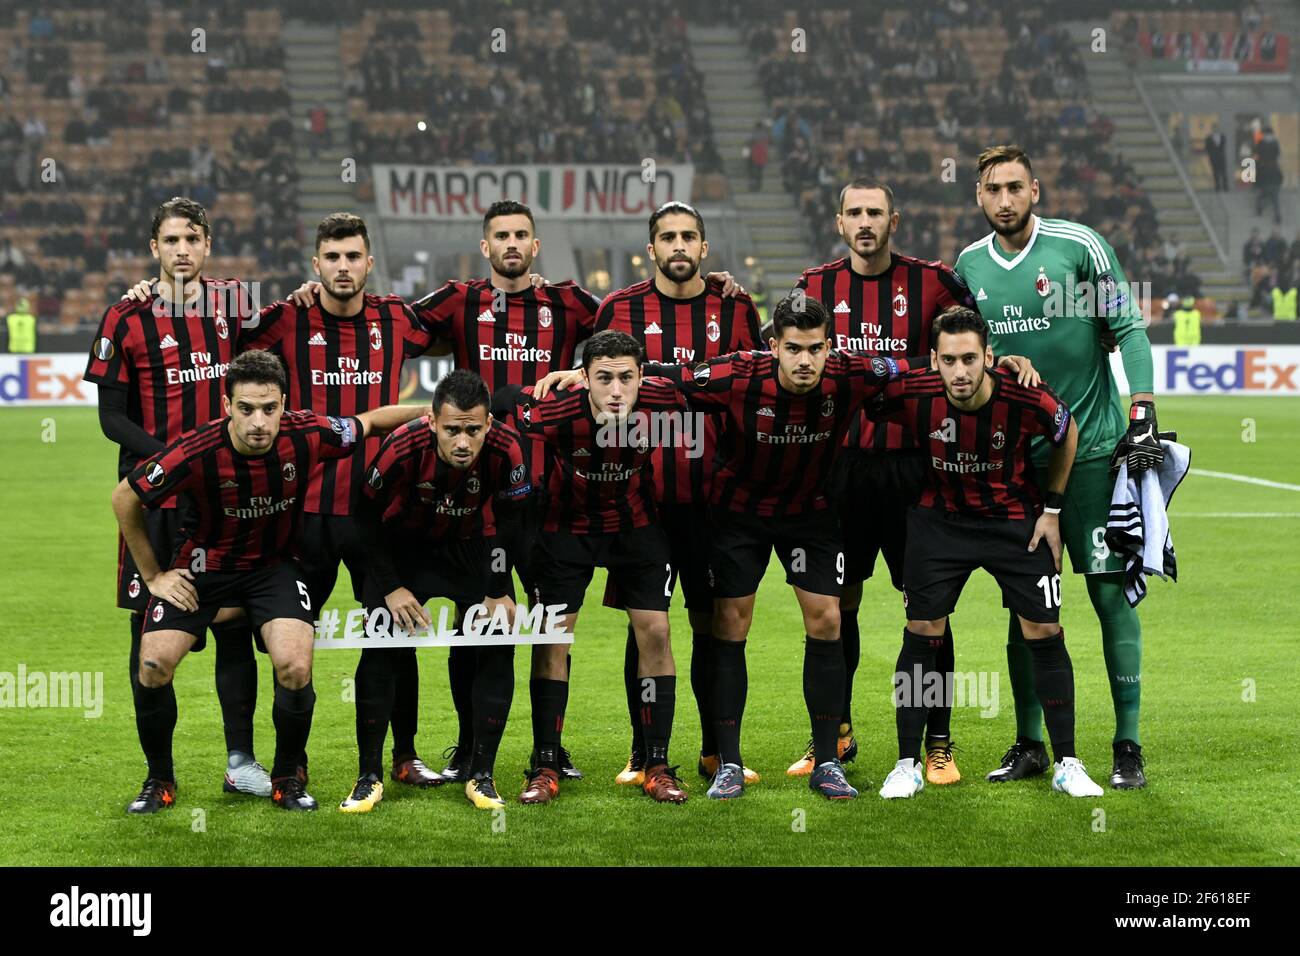 Ac milan football team hi-res stock photography and images - Alamy